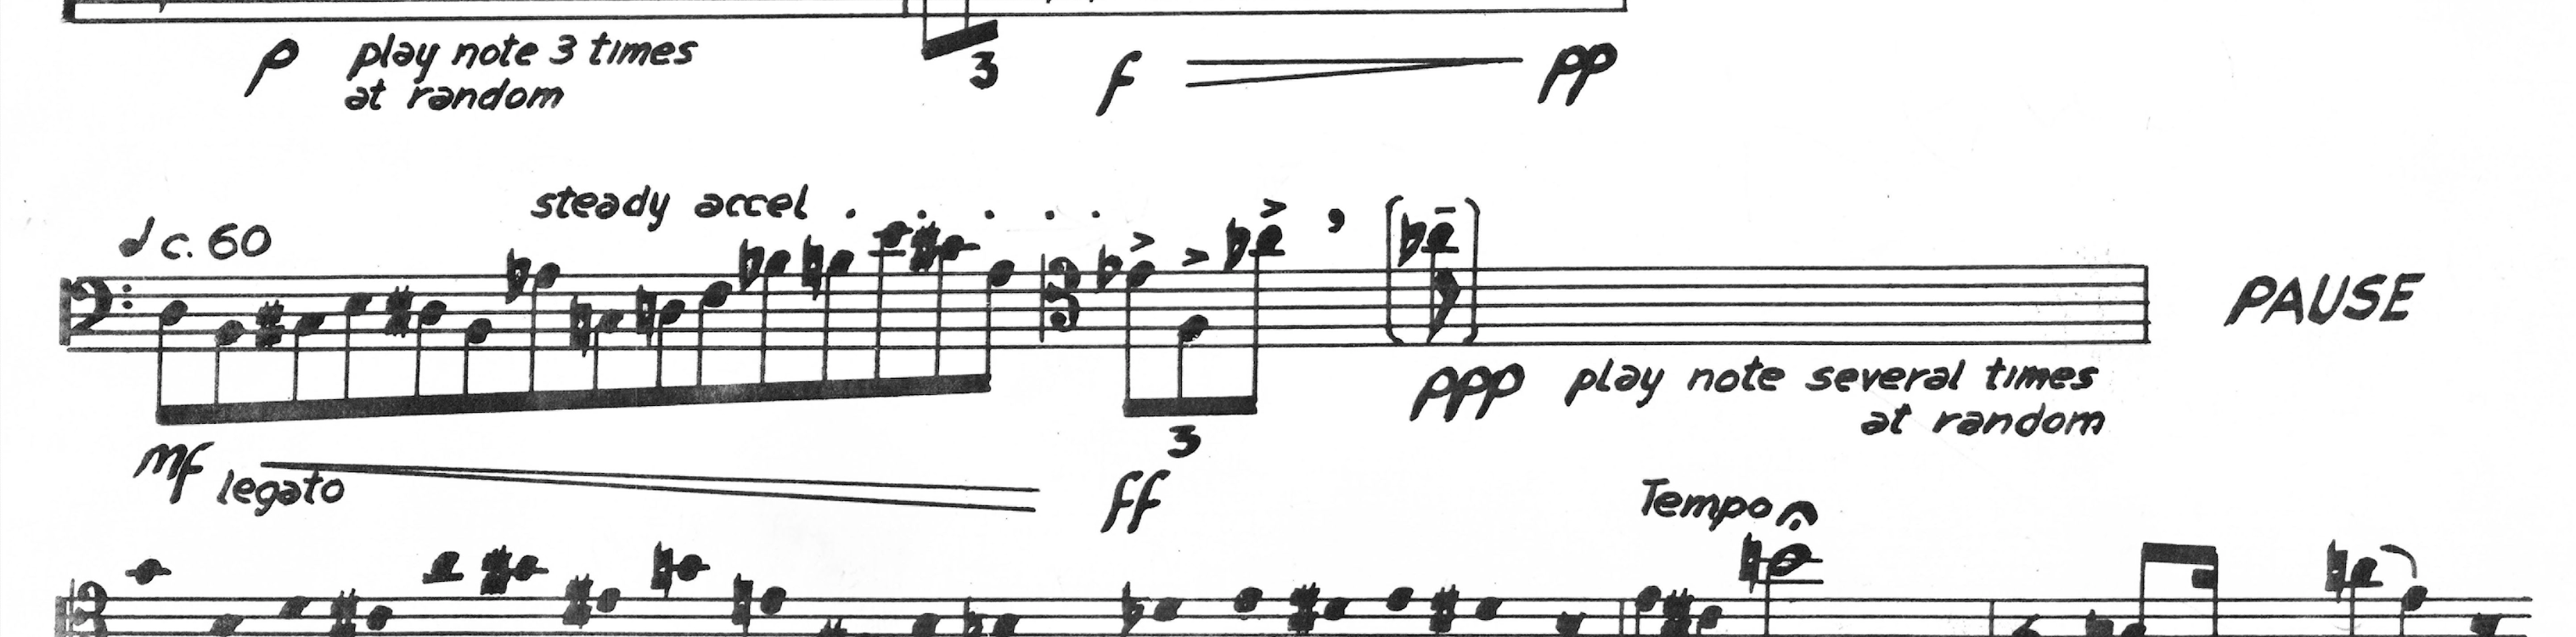 Excerpt from Sonata for Solo Trombone by Barney Childs